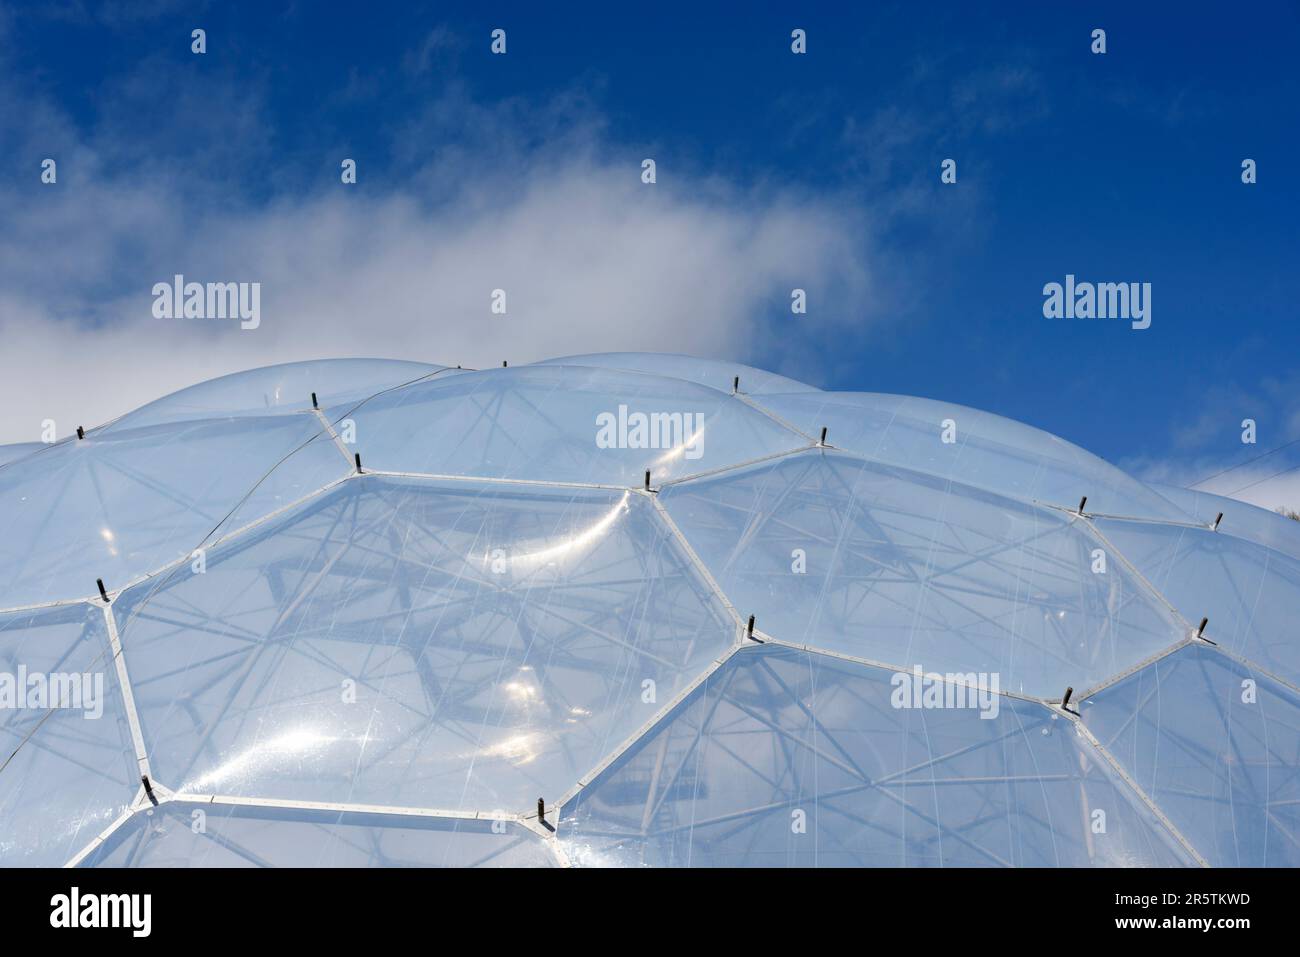 Giant dome of the Eden Project, near St Austell, Cornwall, England, UK Stock Photo